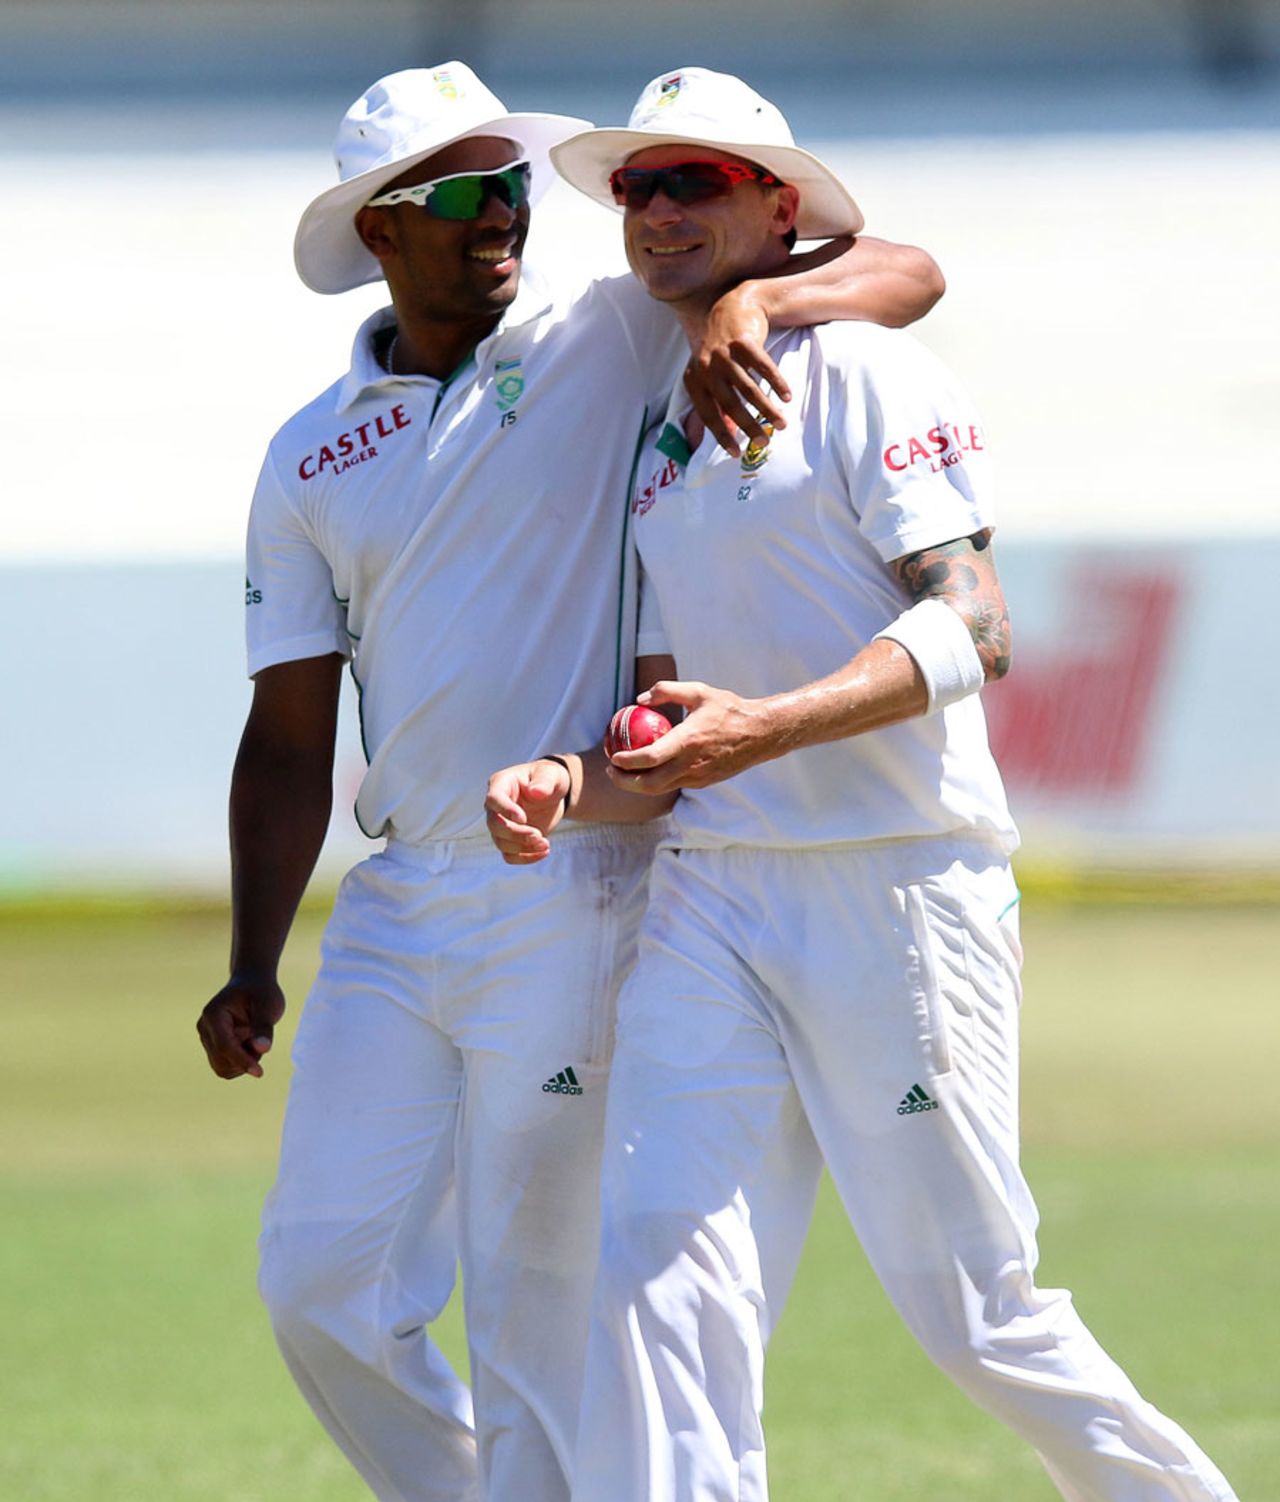 Vernon Philander and Dale Steyn share a laugh after India are bowled out, South Africa v India, 2nd Test, Durban, 4th day, December 29, 2013